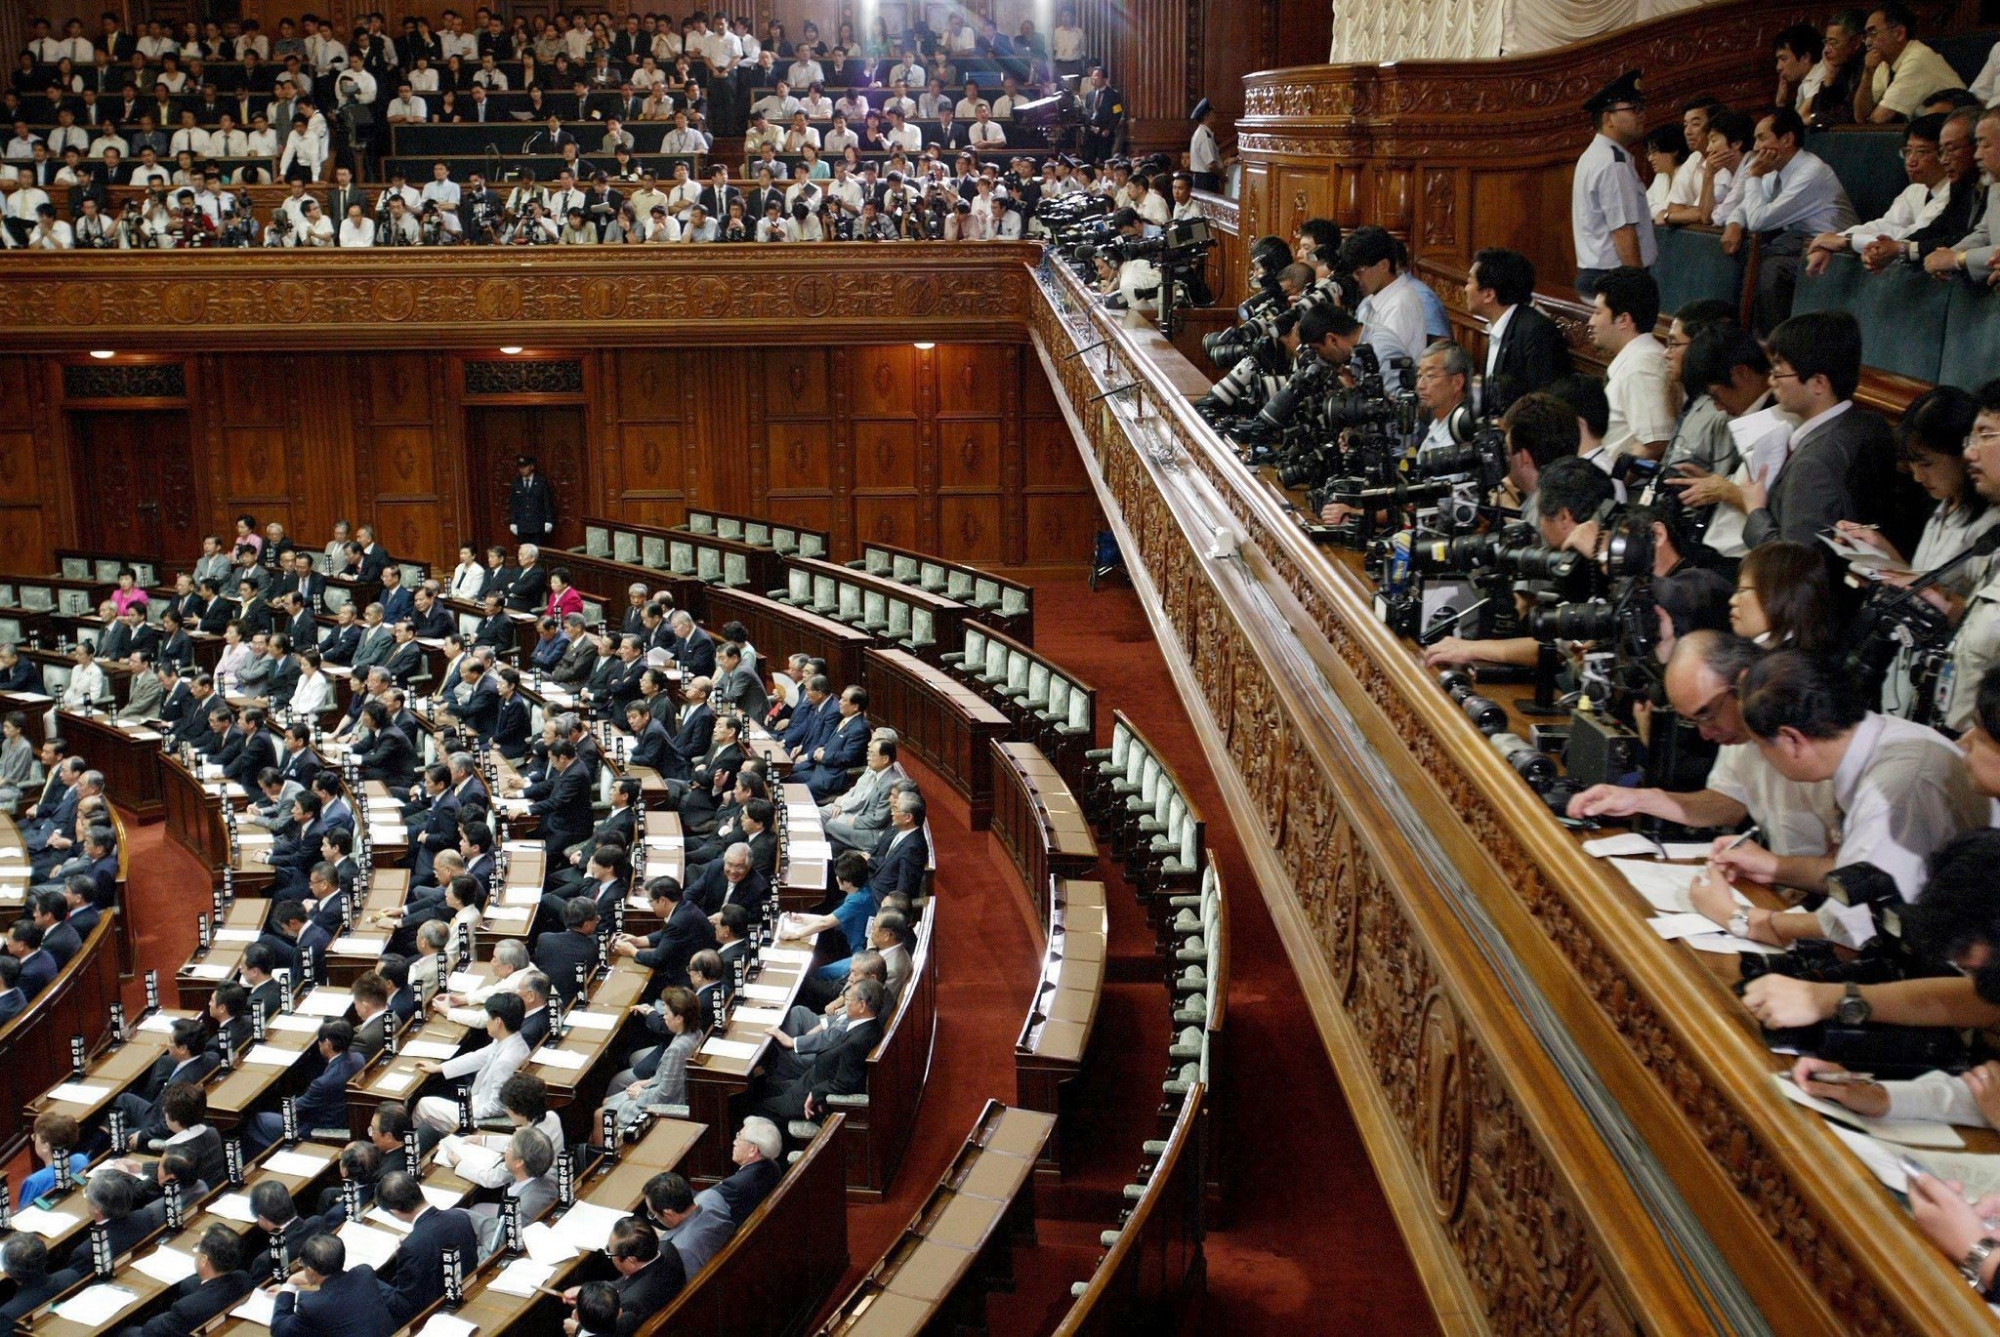 Members of the Upper House convene to vote on Japanese Prime Minister Junichiro Koizumi's post office privatization bill at the Diet in Tokyo, Monday, 08 August 2005. Japan's Upper House of parliament, or Diet,  rejected Koizumi's key reforms of privatizing the post office, with a vote 125 votes against and 108 in favor. Koizumi has threatened new elections more than two years ahead of schedule if the voted went against and may now call for general elections in September.  (KEYSTONE/EPA/ANDY RAIN) JAPAN POSTAL BILL